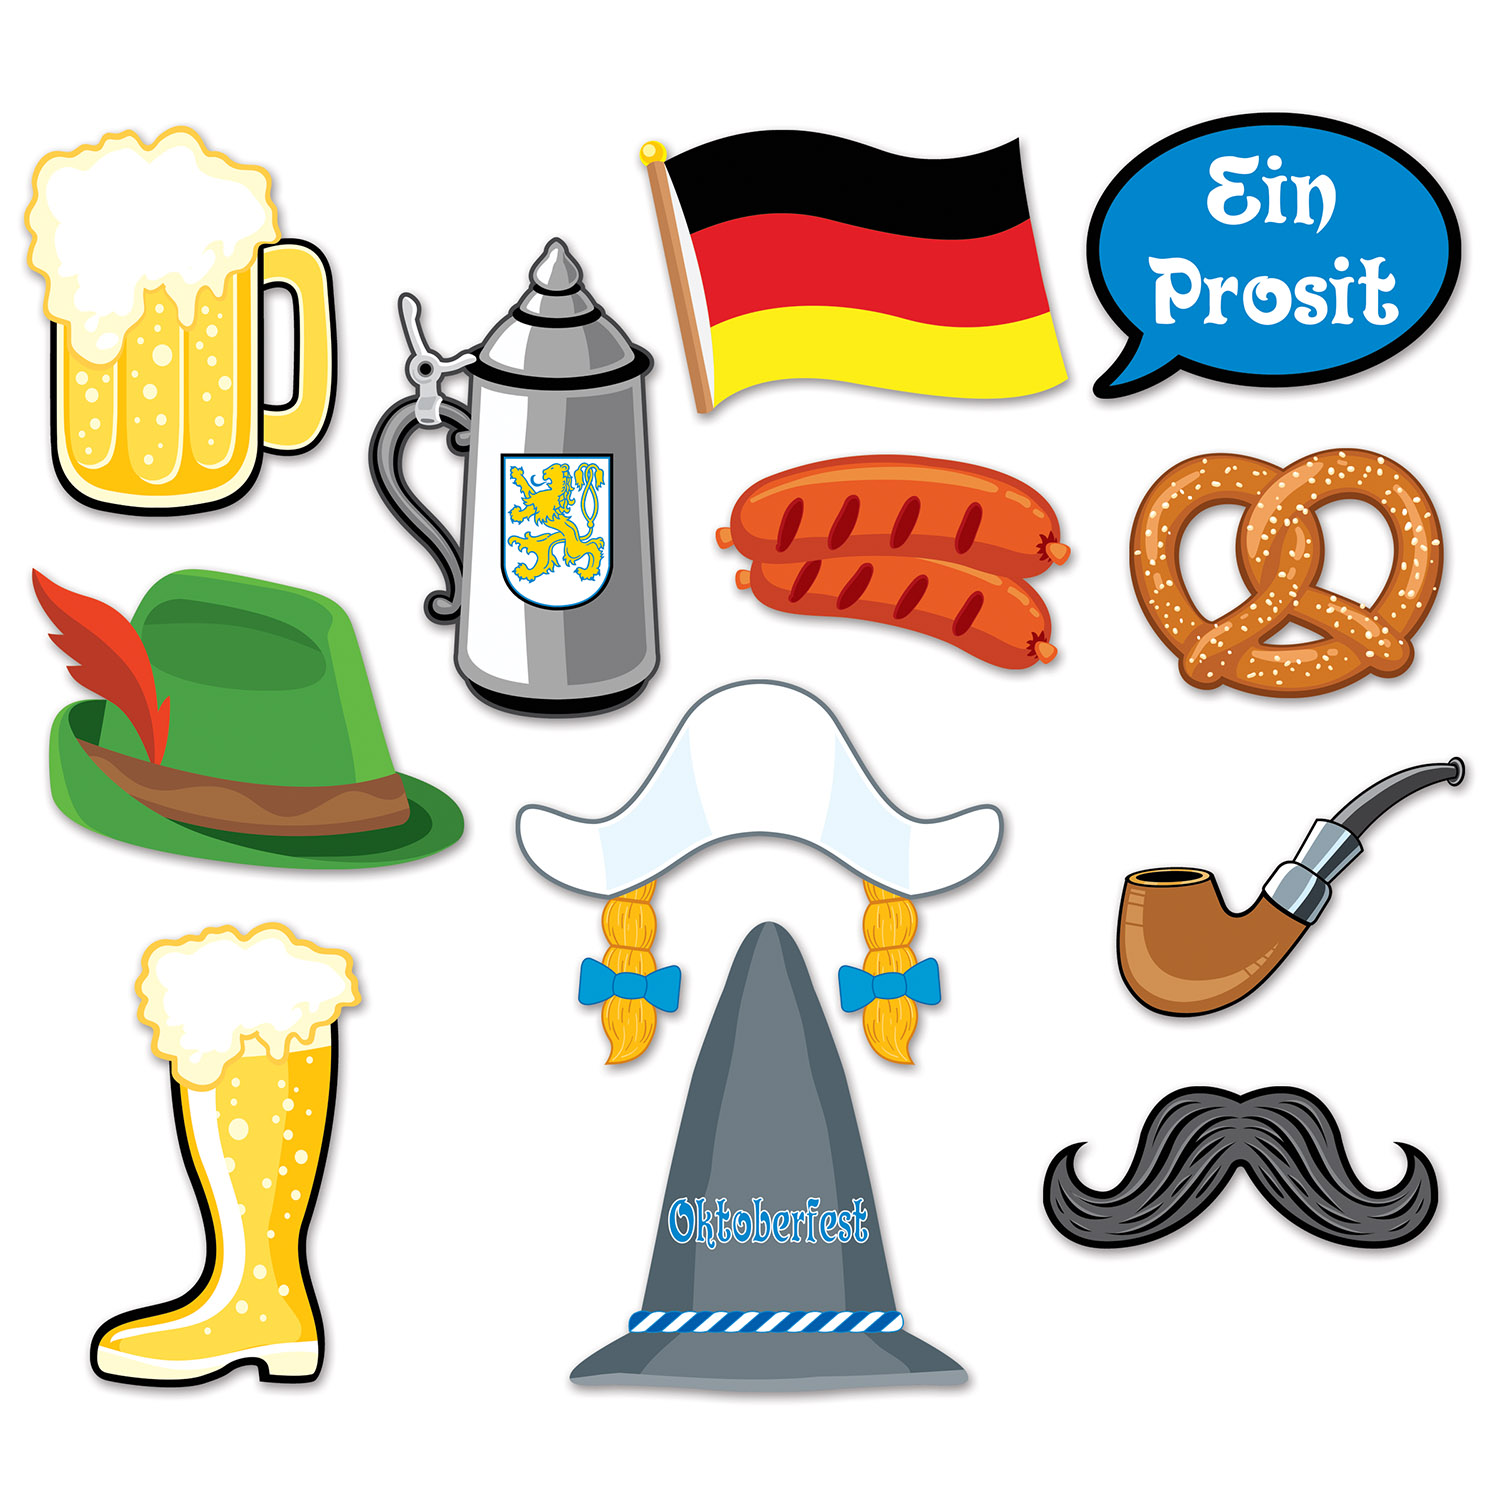 12 Pieces Oktoberfest Photo Fun Signs - Hanging Decorations & Cut Out